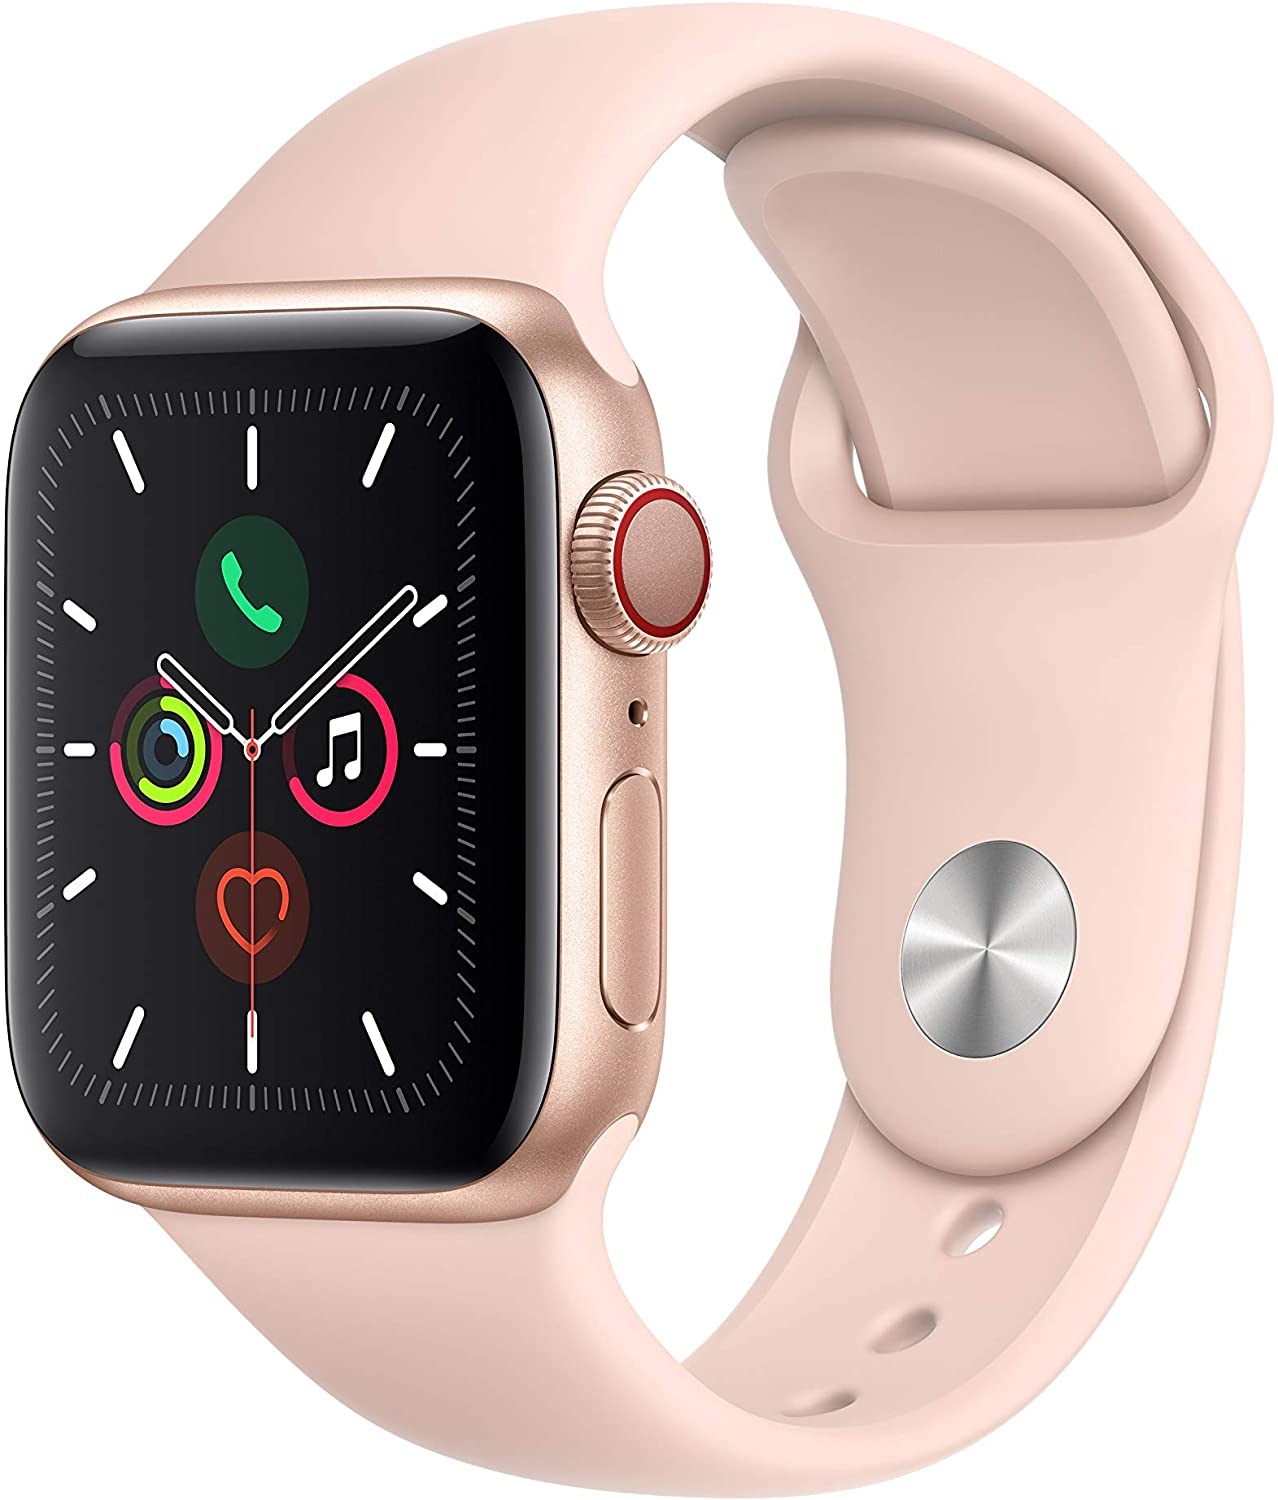 thumbnail 2 - Apple Watch Series 5 40mm 44mm - GPS Only or GPS + Cellular - Various colors